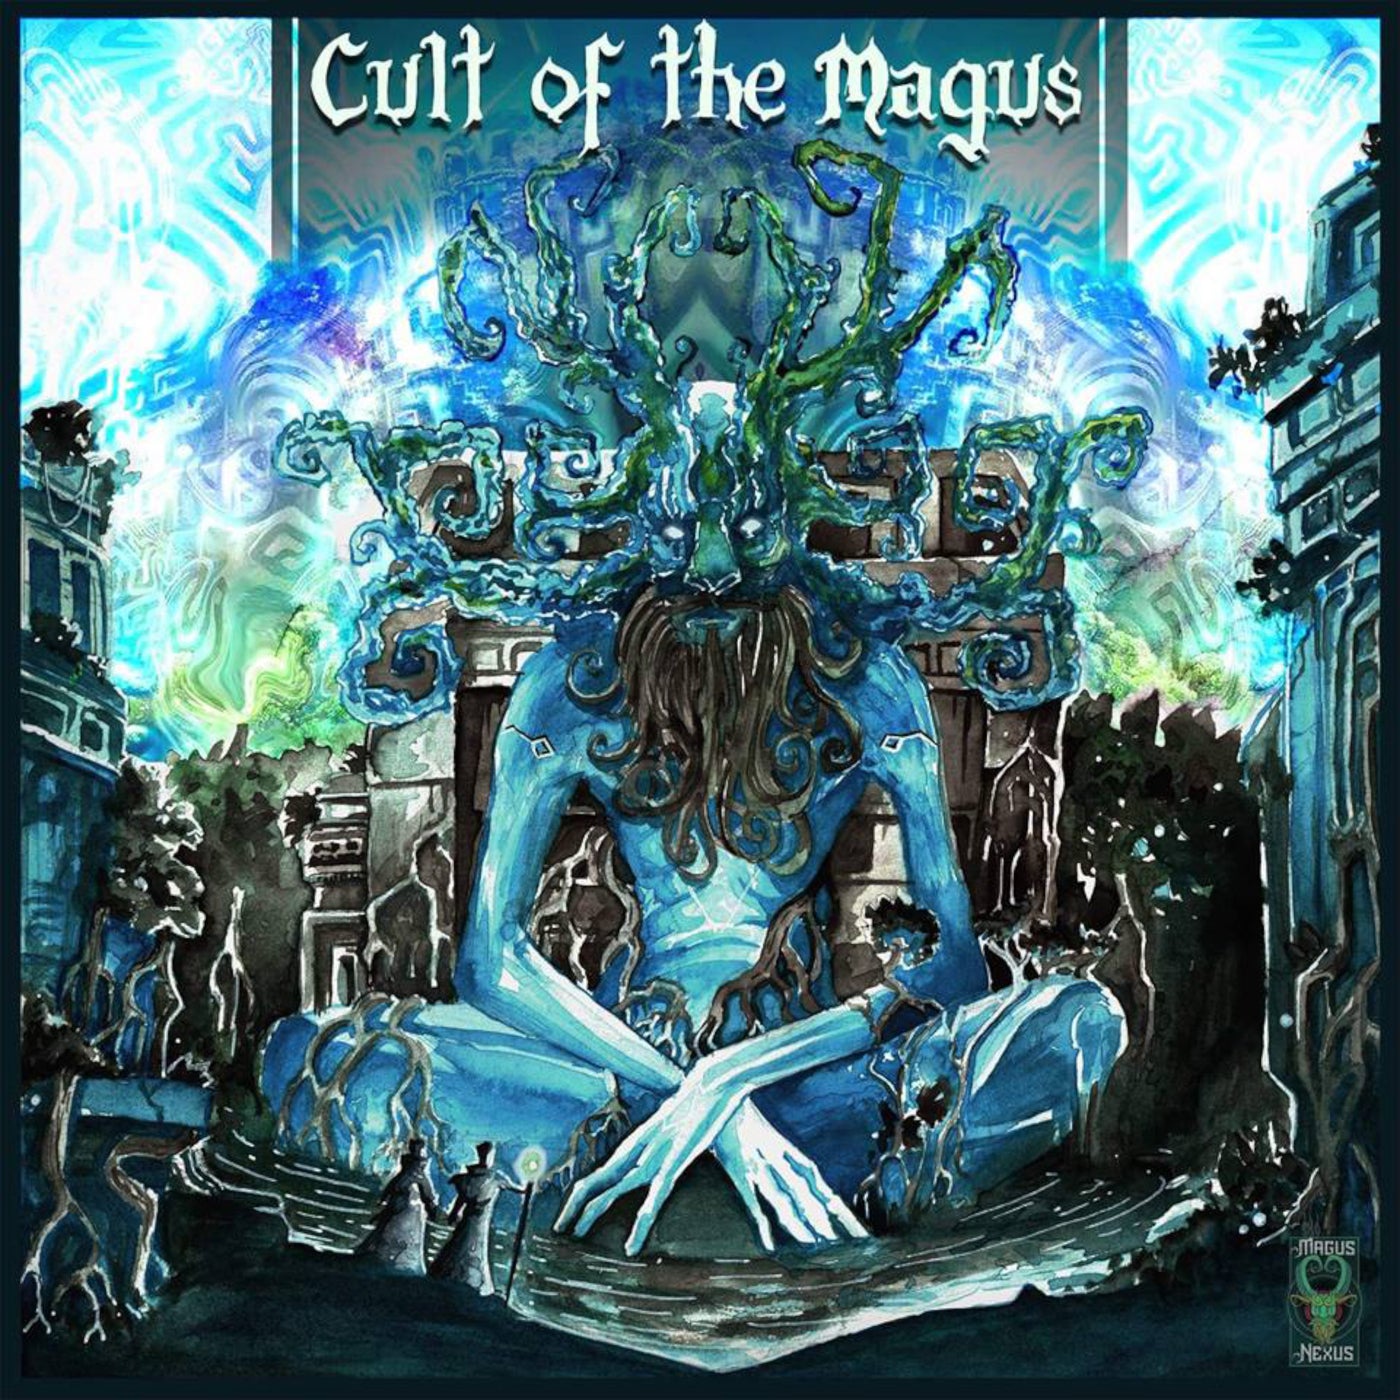 Cult of the magus